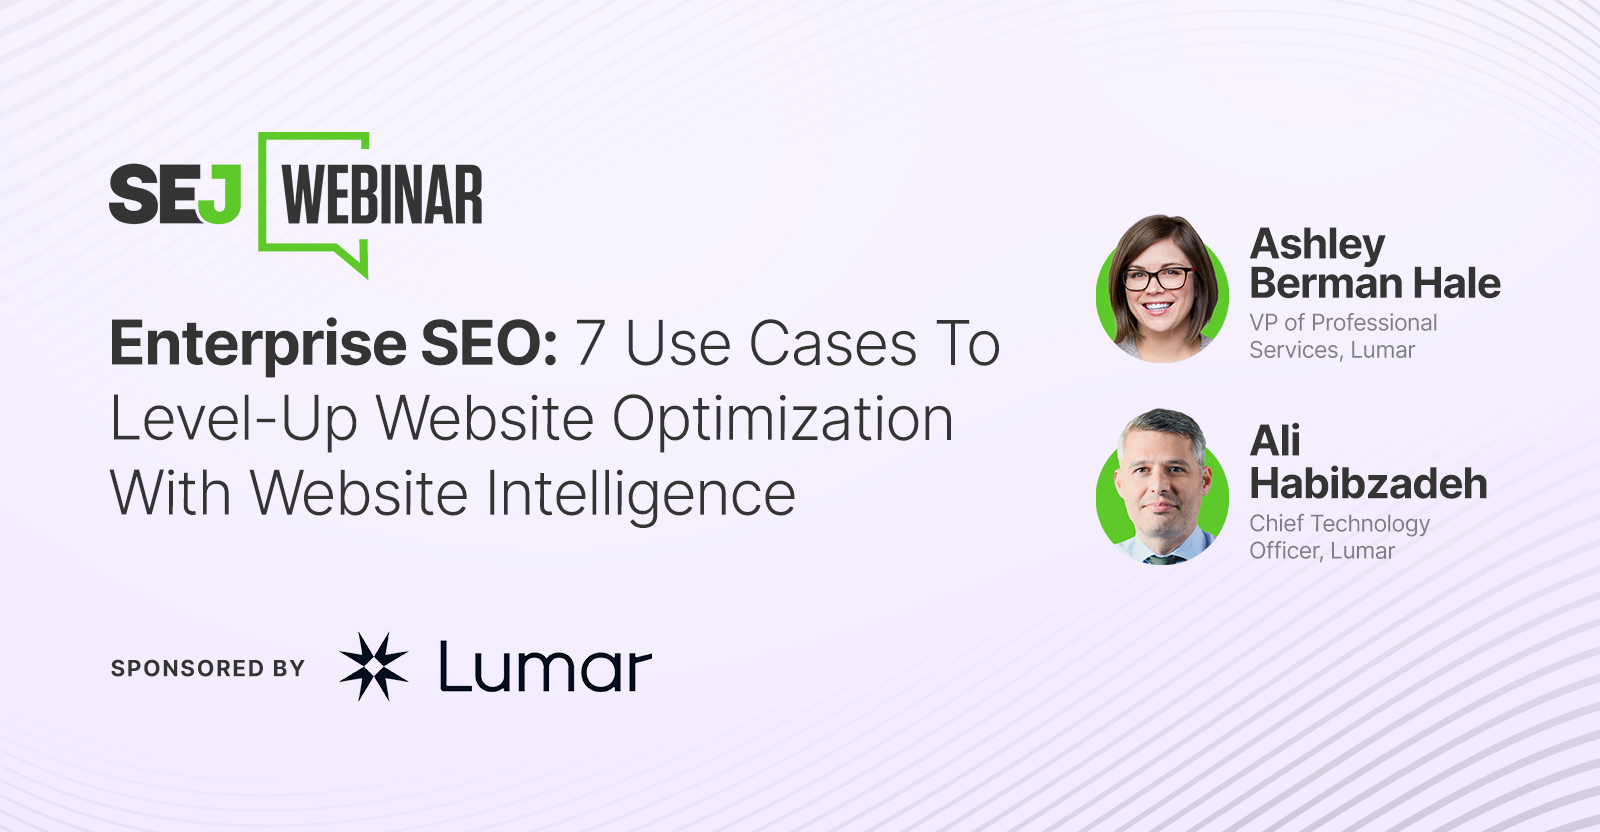 Uses Cases To Optimize With Website Intelligence